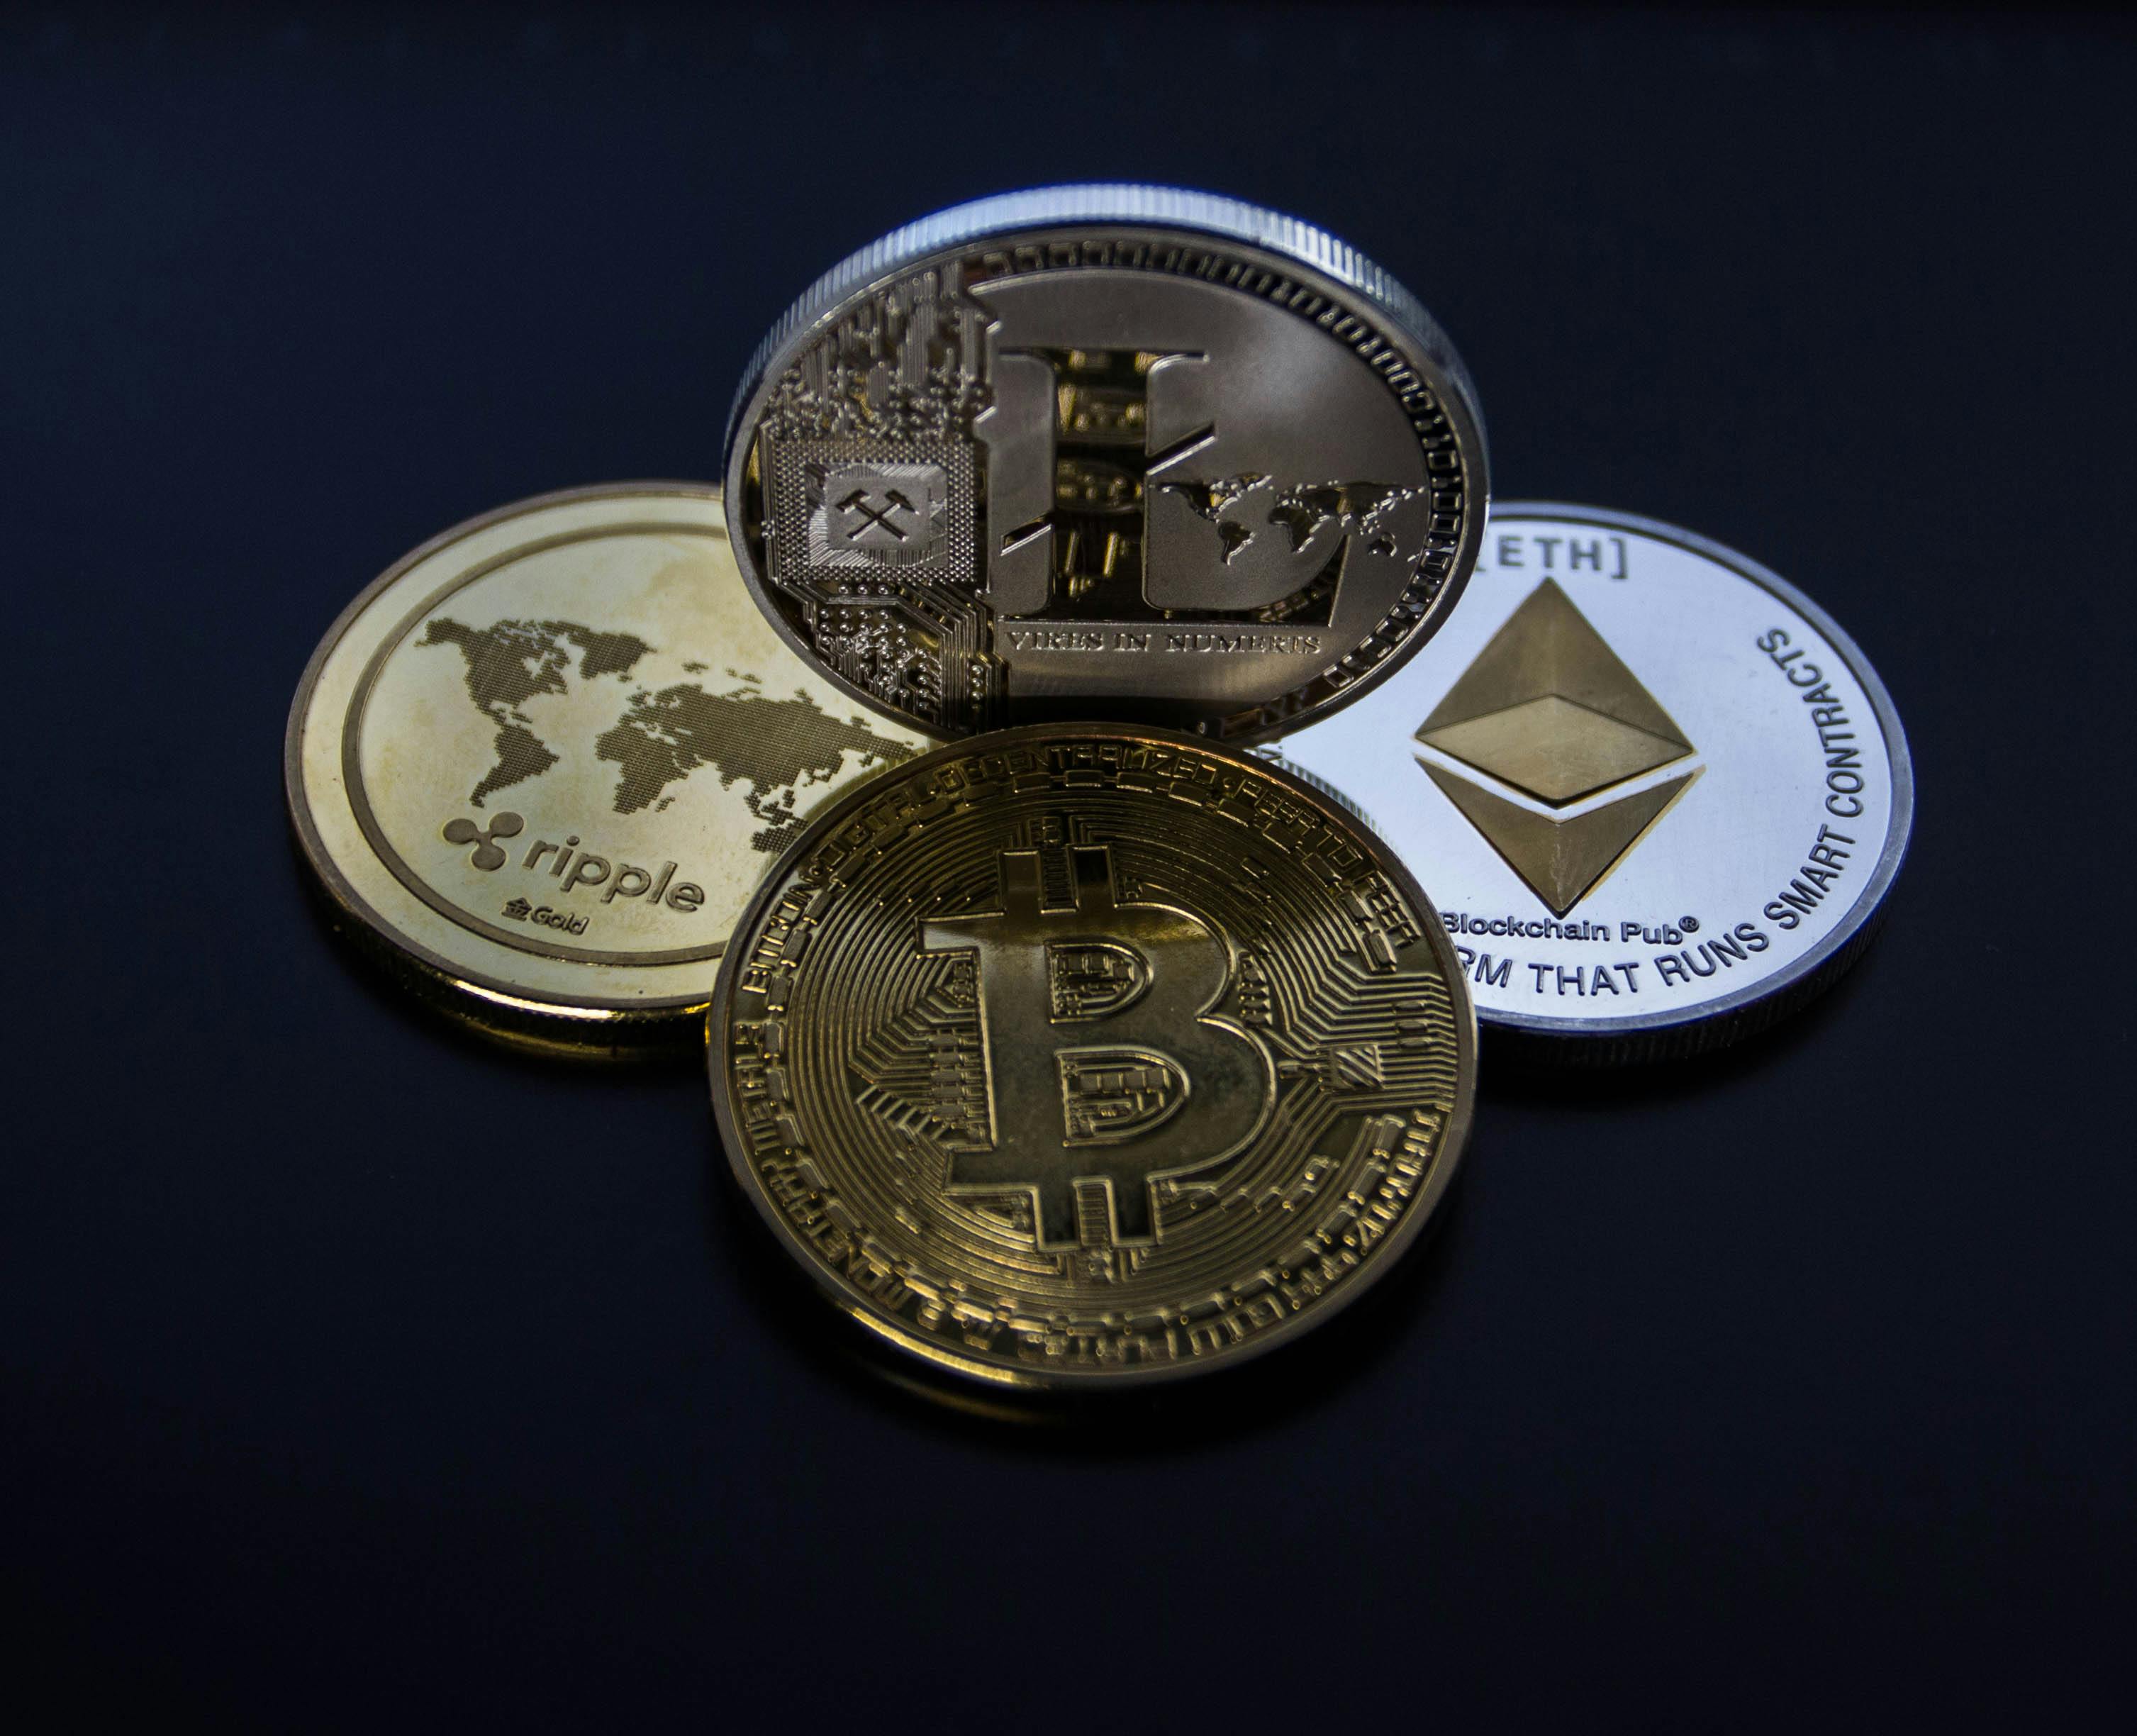 Four Assorted Cryptocurrency Coins \u00b7 Free Stock Photo